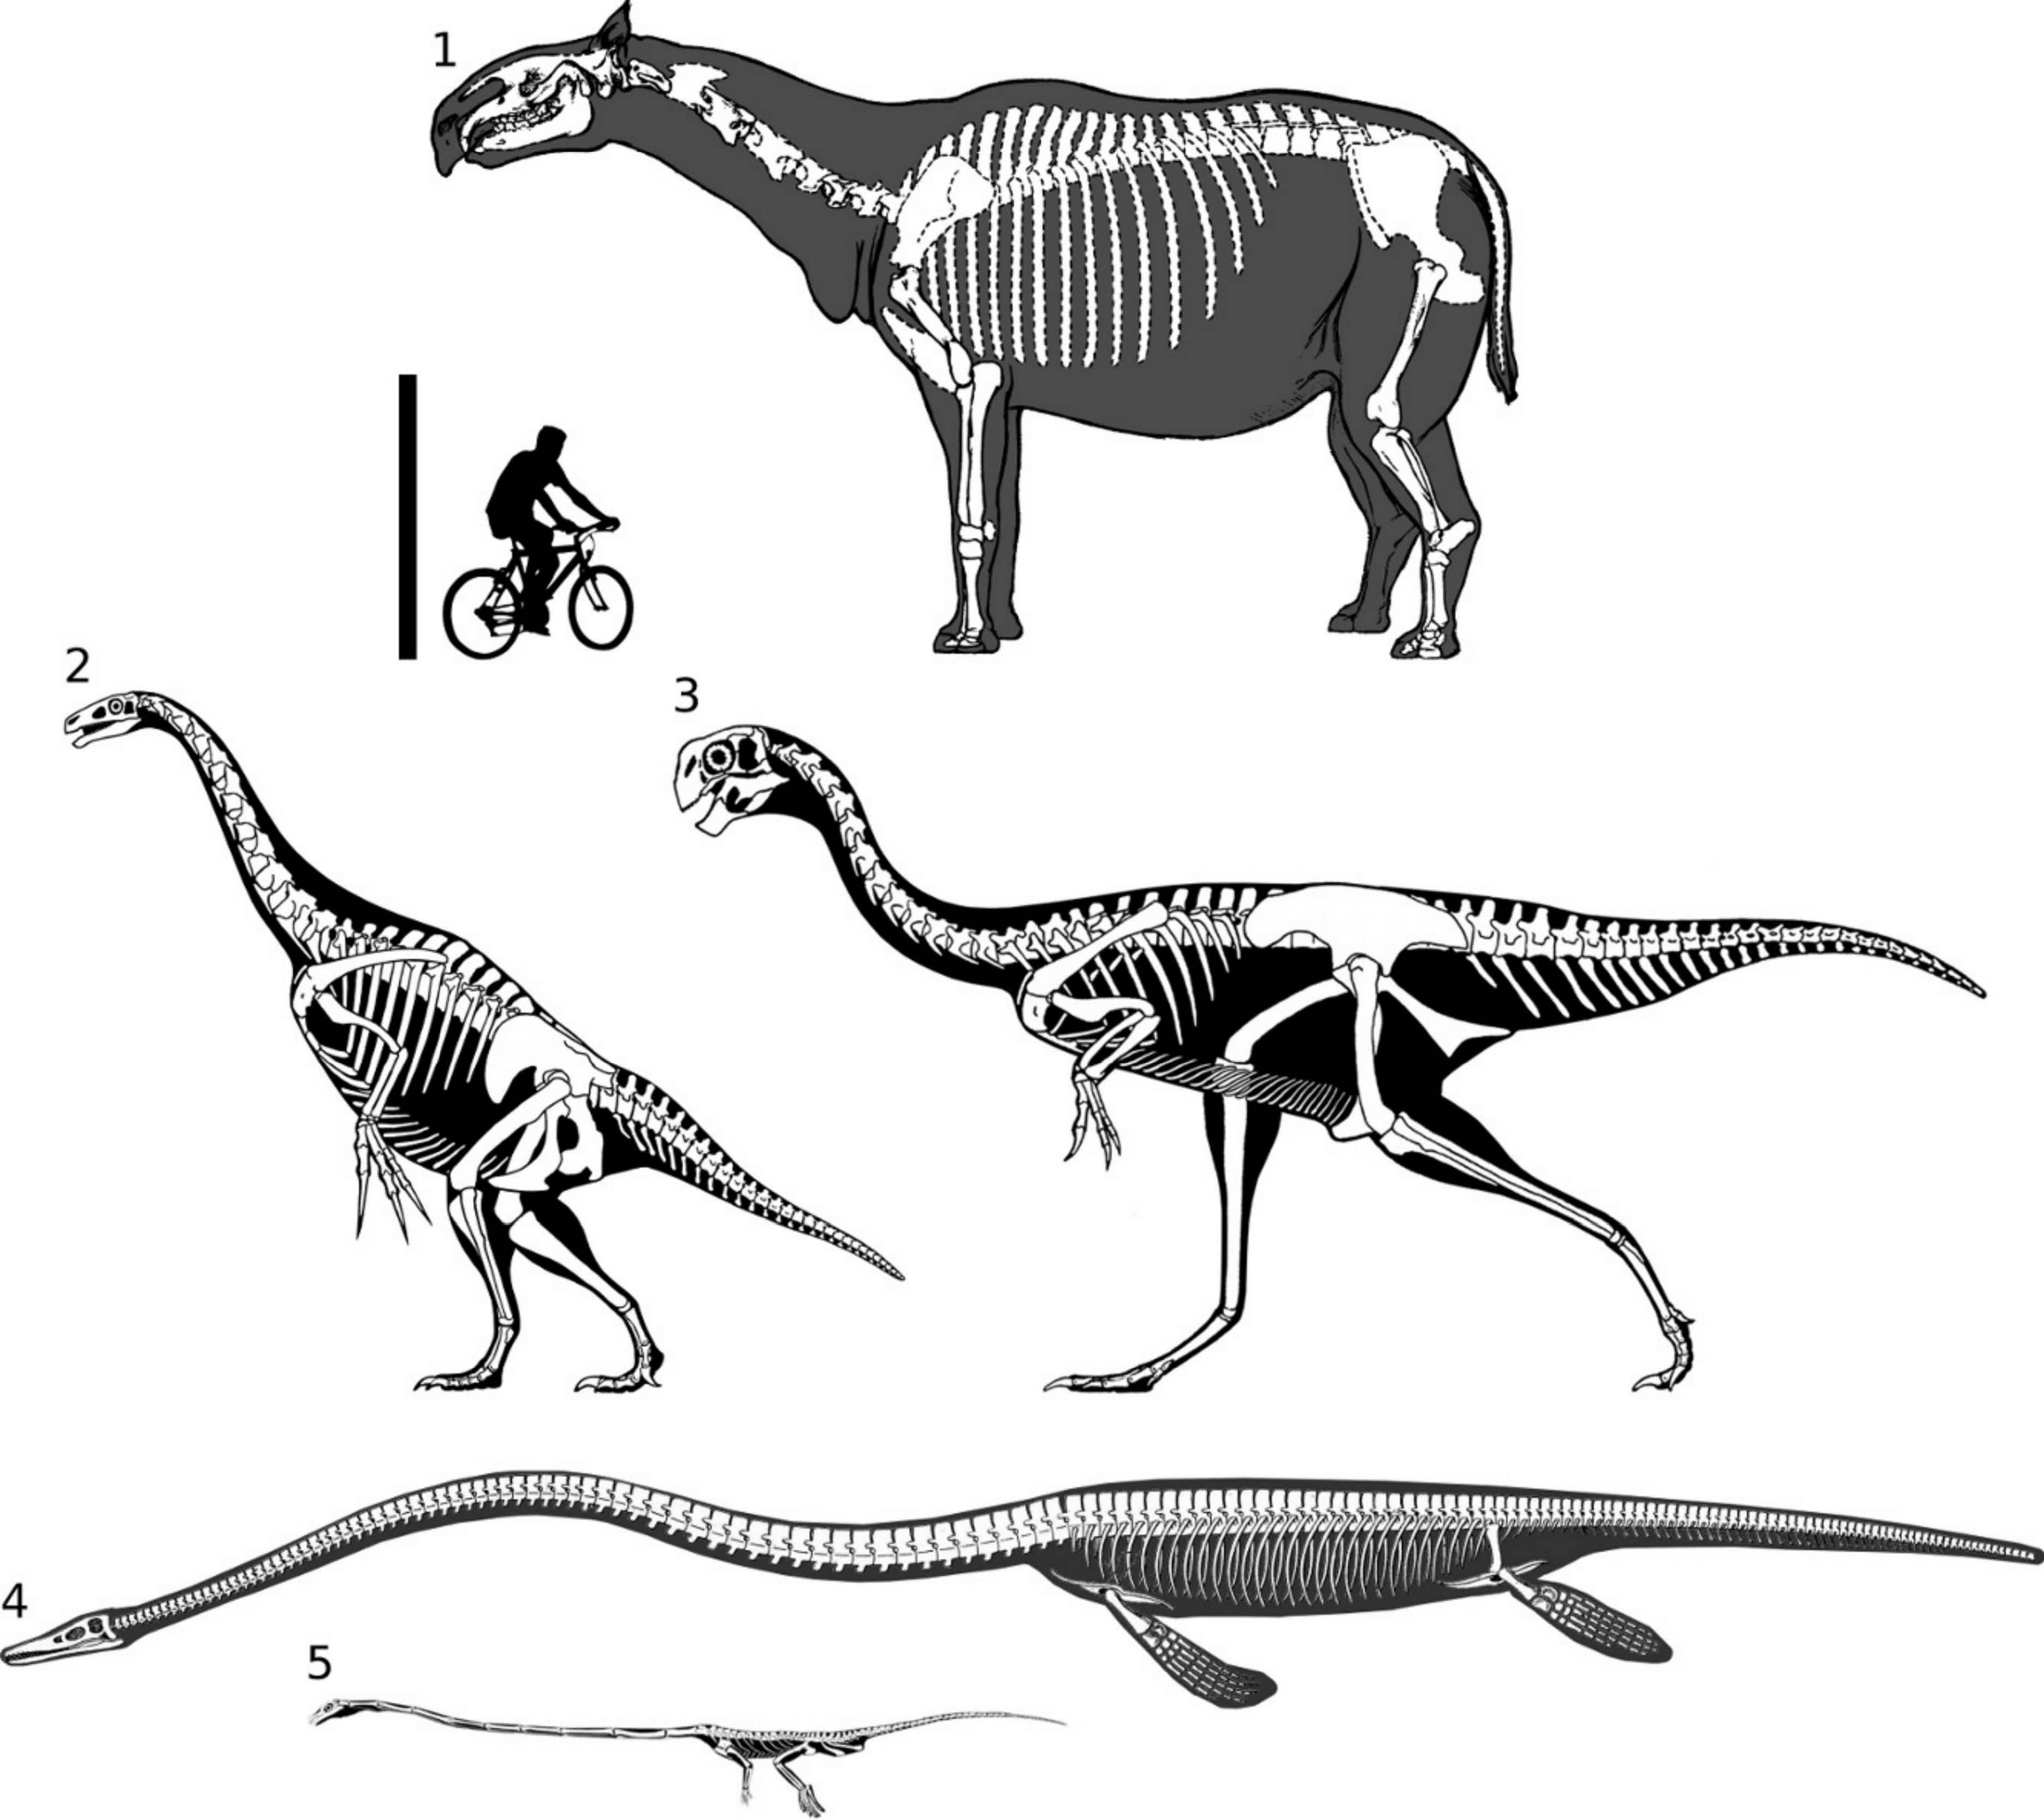 Skeletons of some long-necked non-sauropods